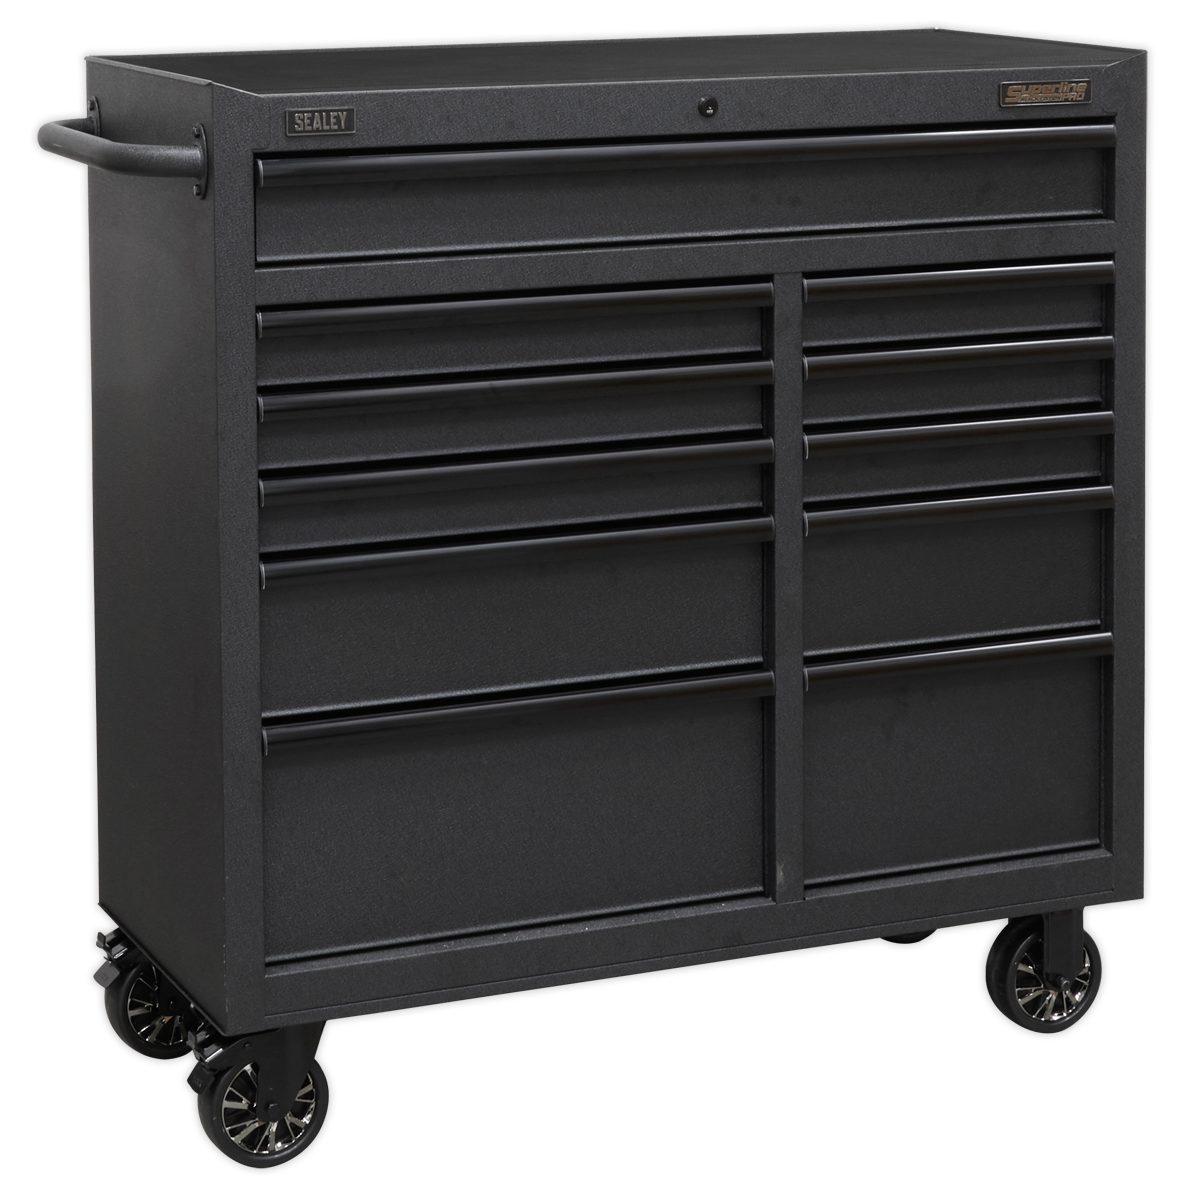 Sealey Rollcab 11 Drawer 1040mm with Soft Close Drawers